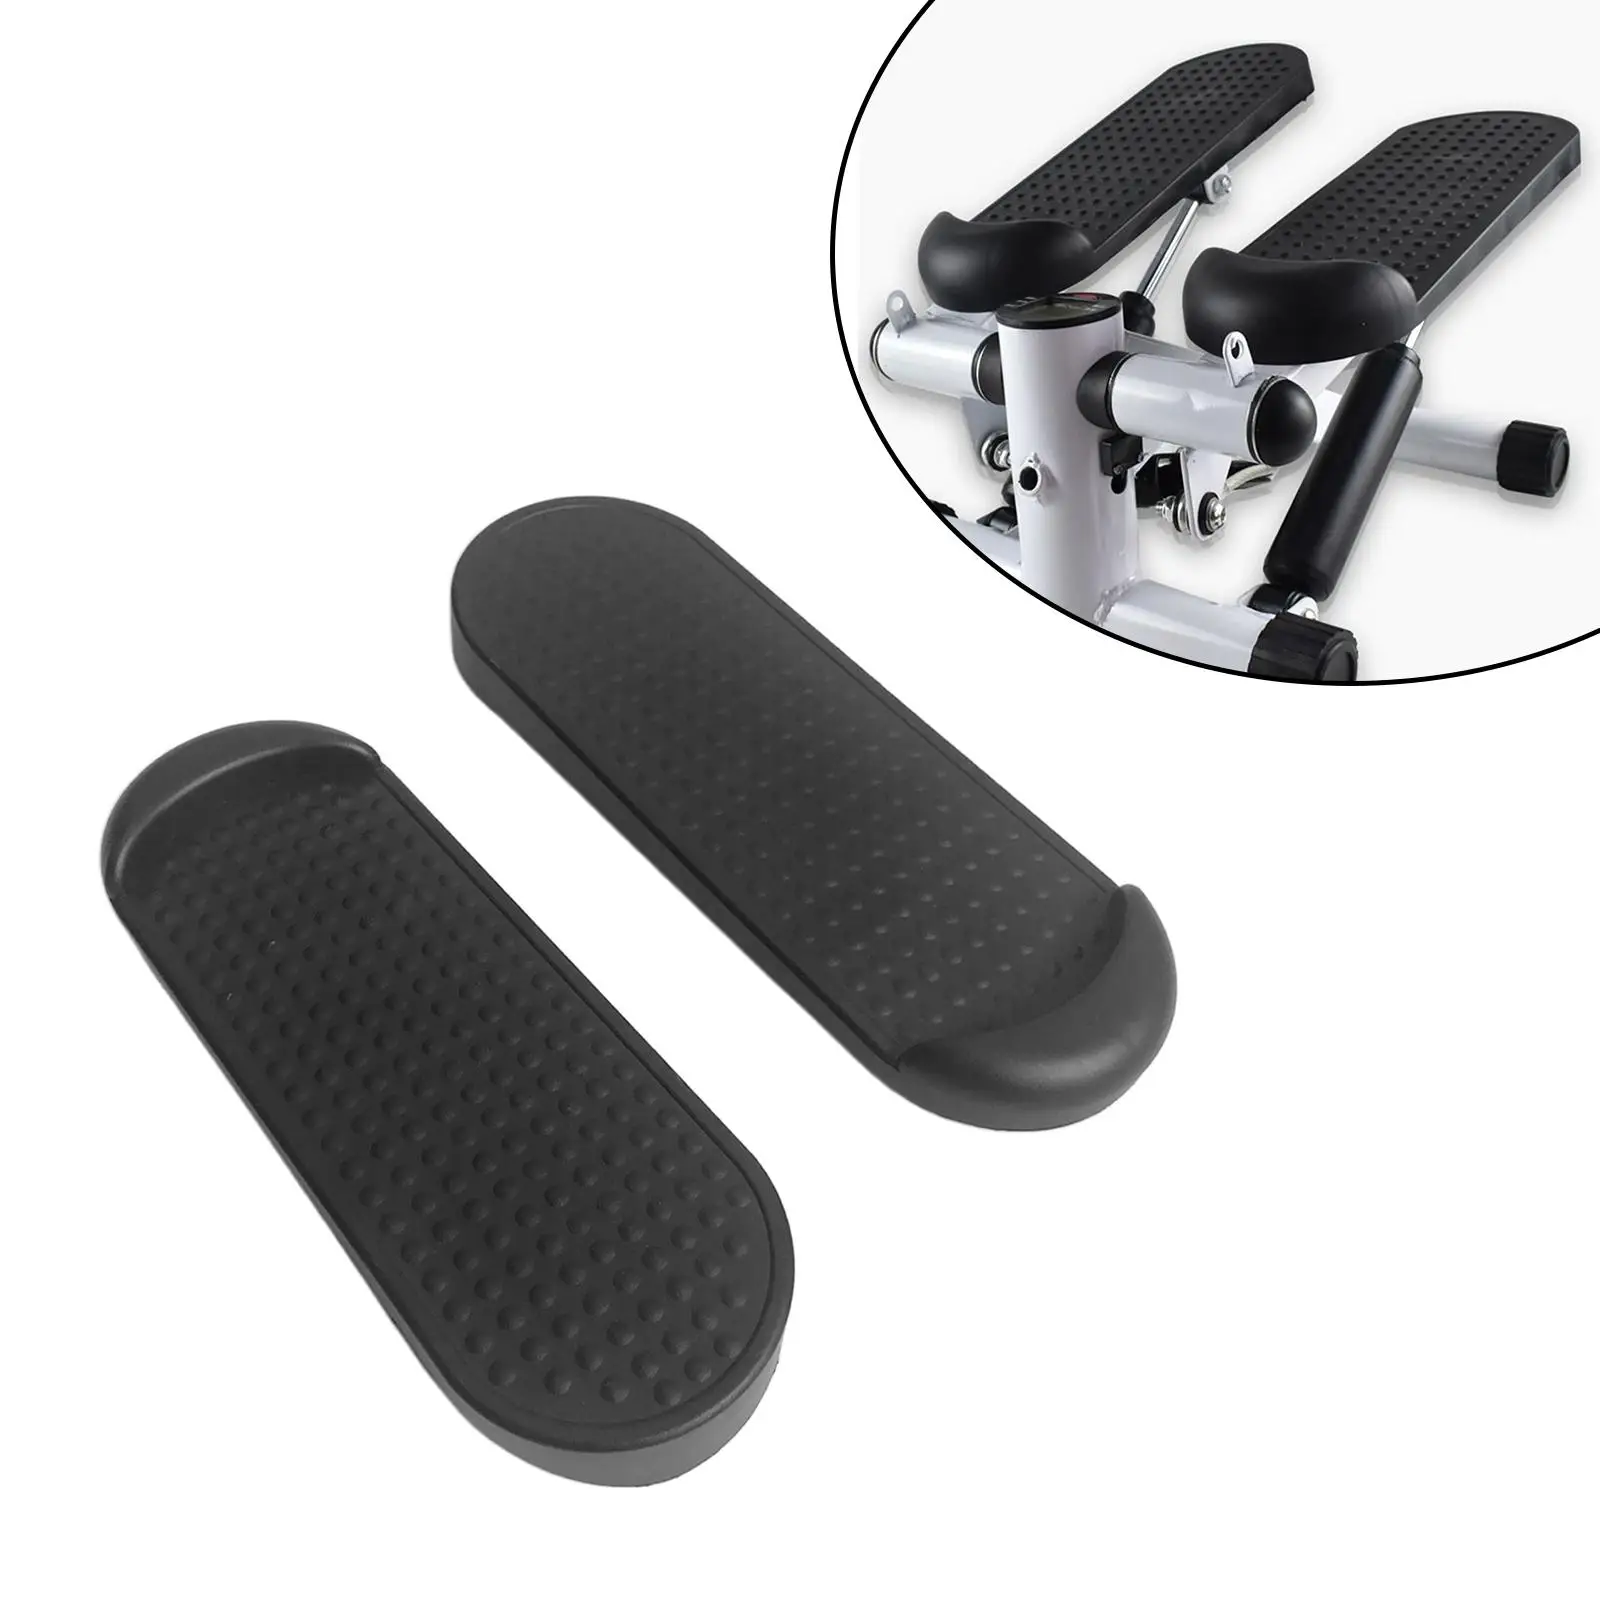 2Pcs Under Desk Elliptical Foot Pedals Seated Elliptical Nonslip Pad Stair Stepper Pedal for Climber Exercise Machine Office